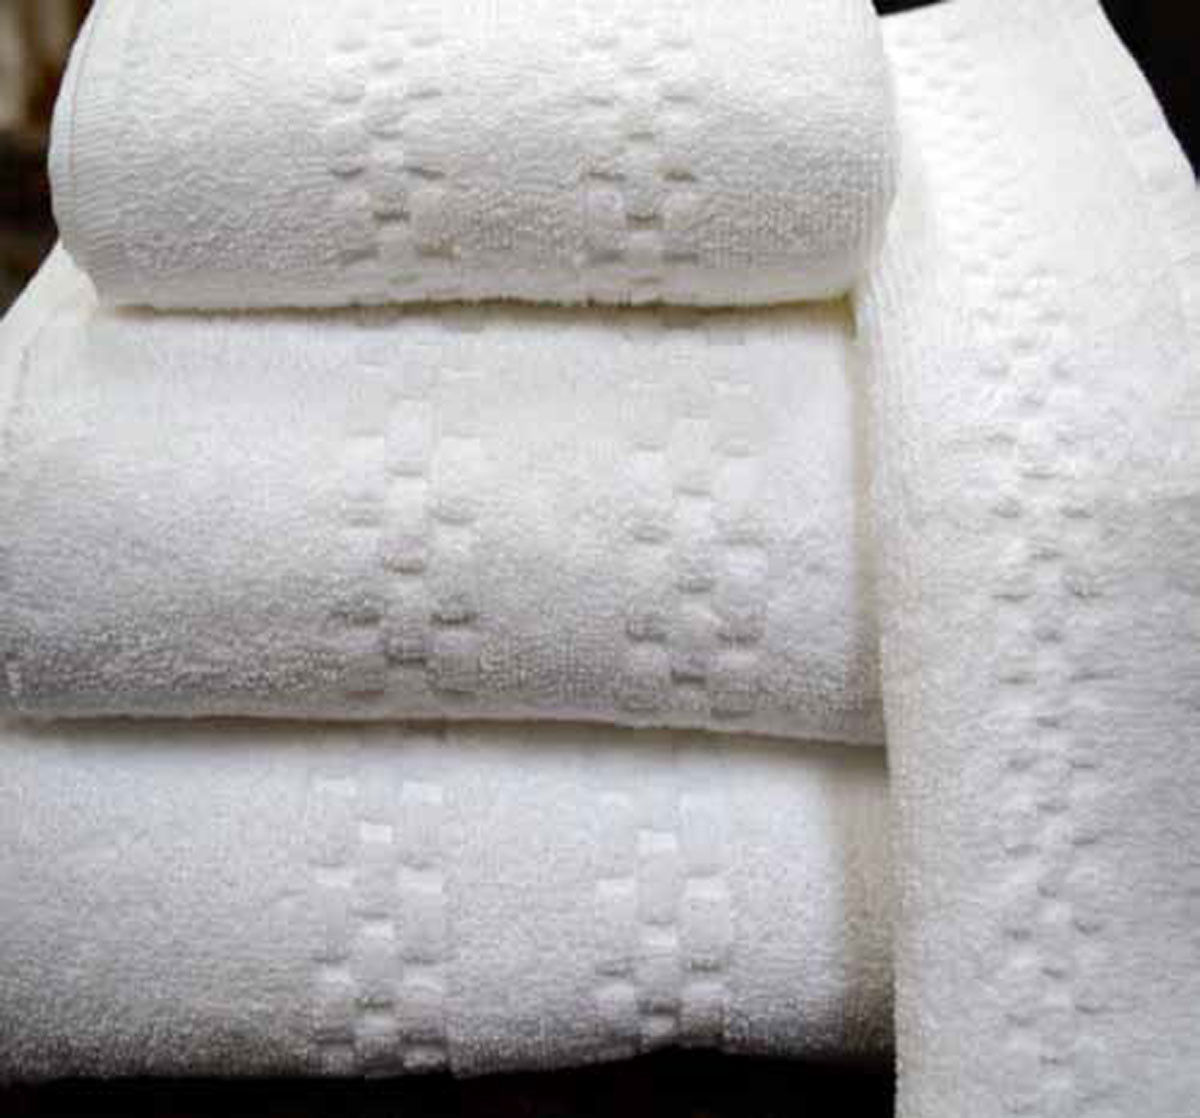 What are extra large bath towels provided in VIP rooms called?